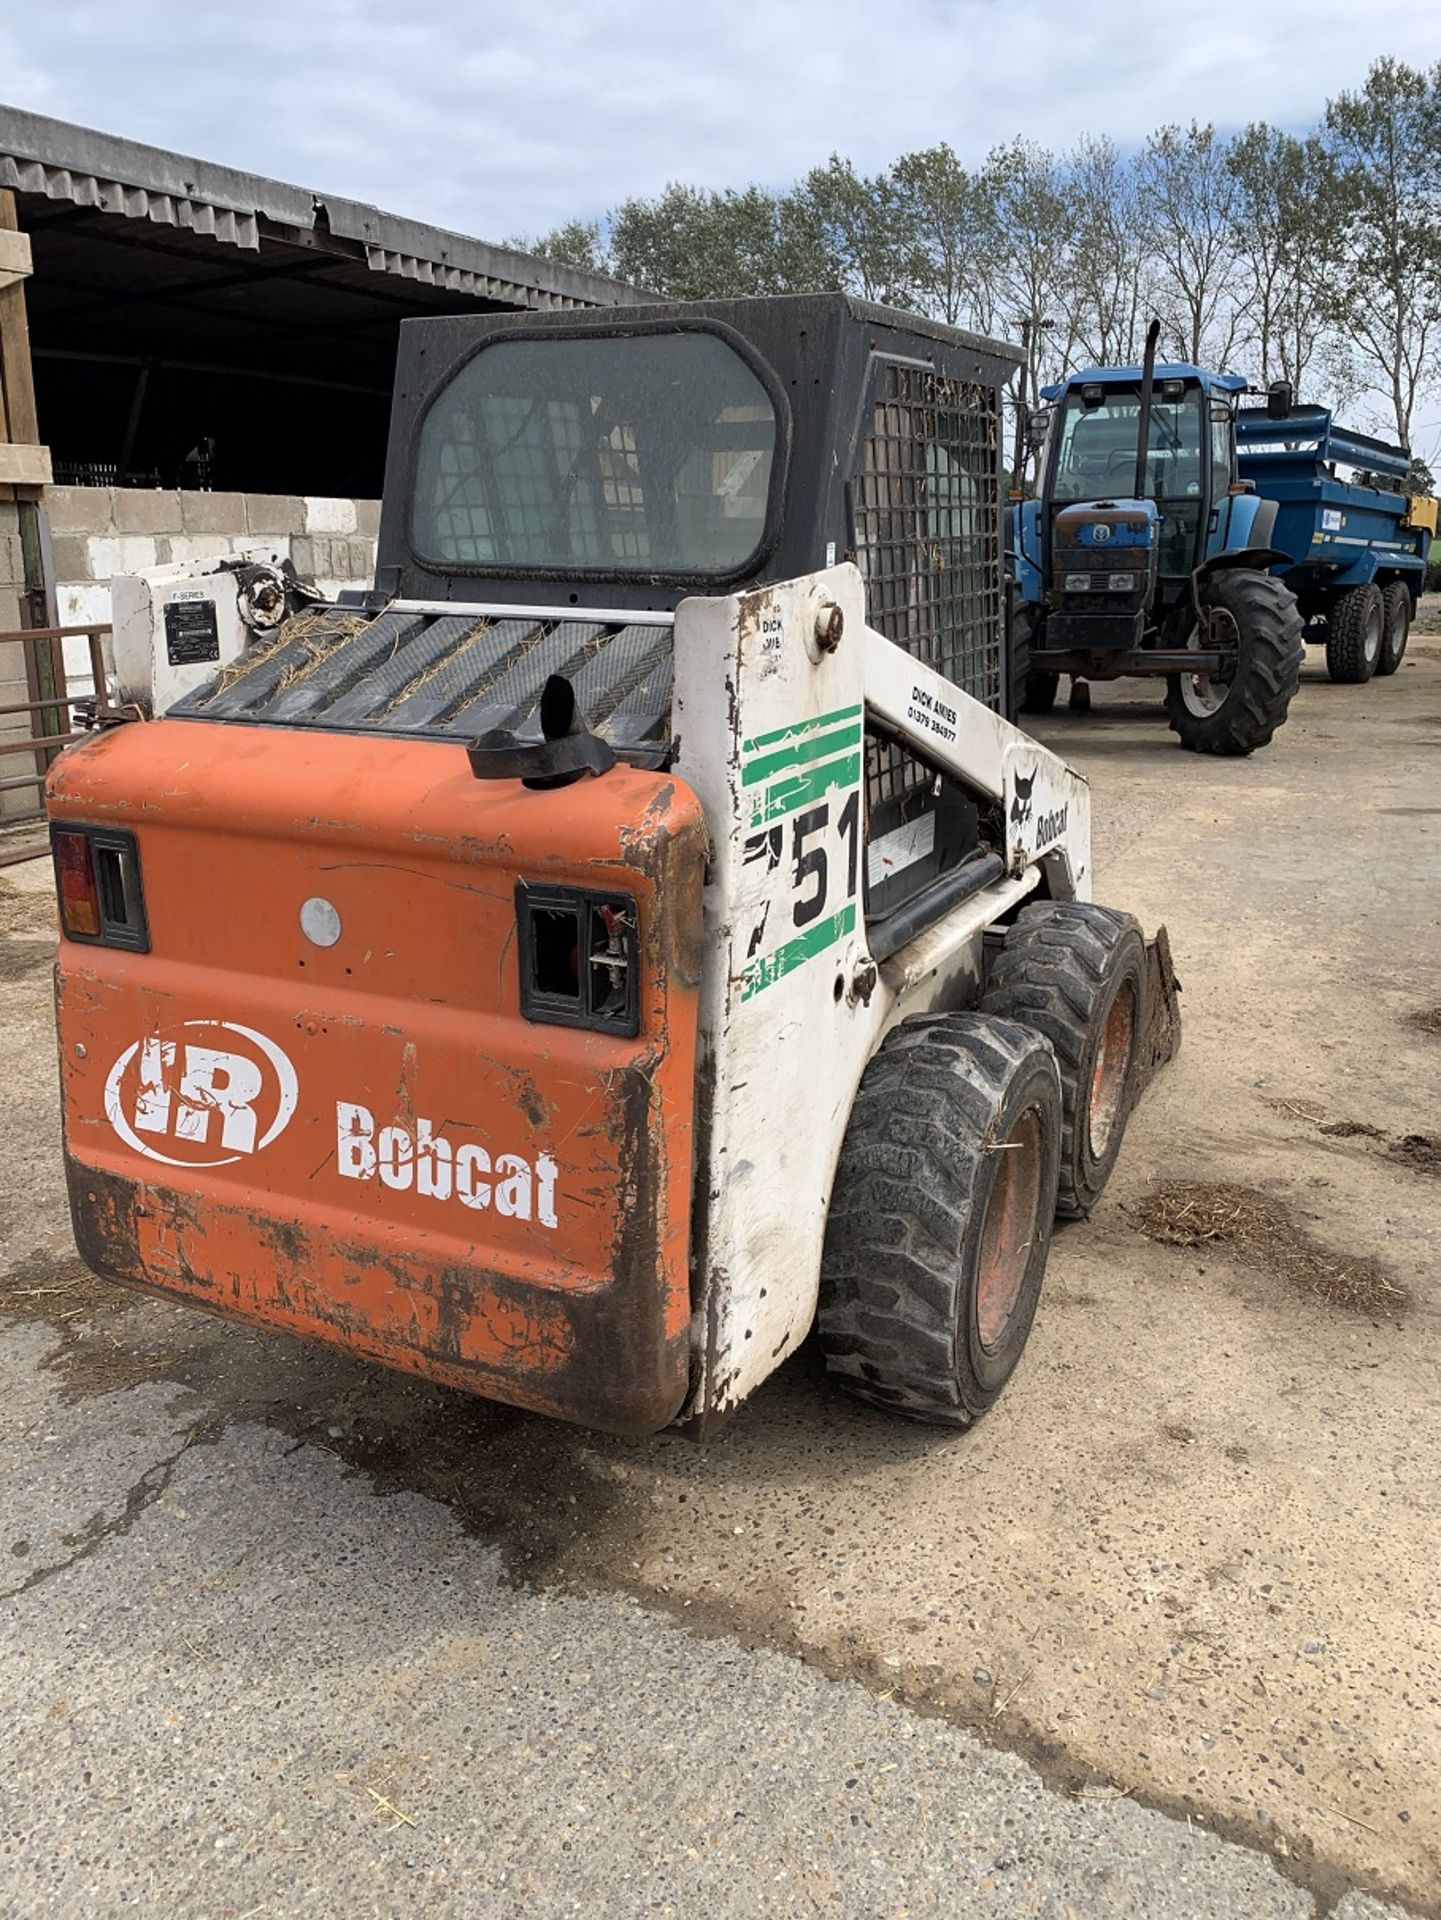 Bobcat 751 compact skid steer (1999), Rebuilt Engine in March 2020, Comes with Spare wheel, - Image 4 of 7